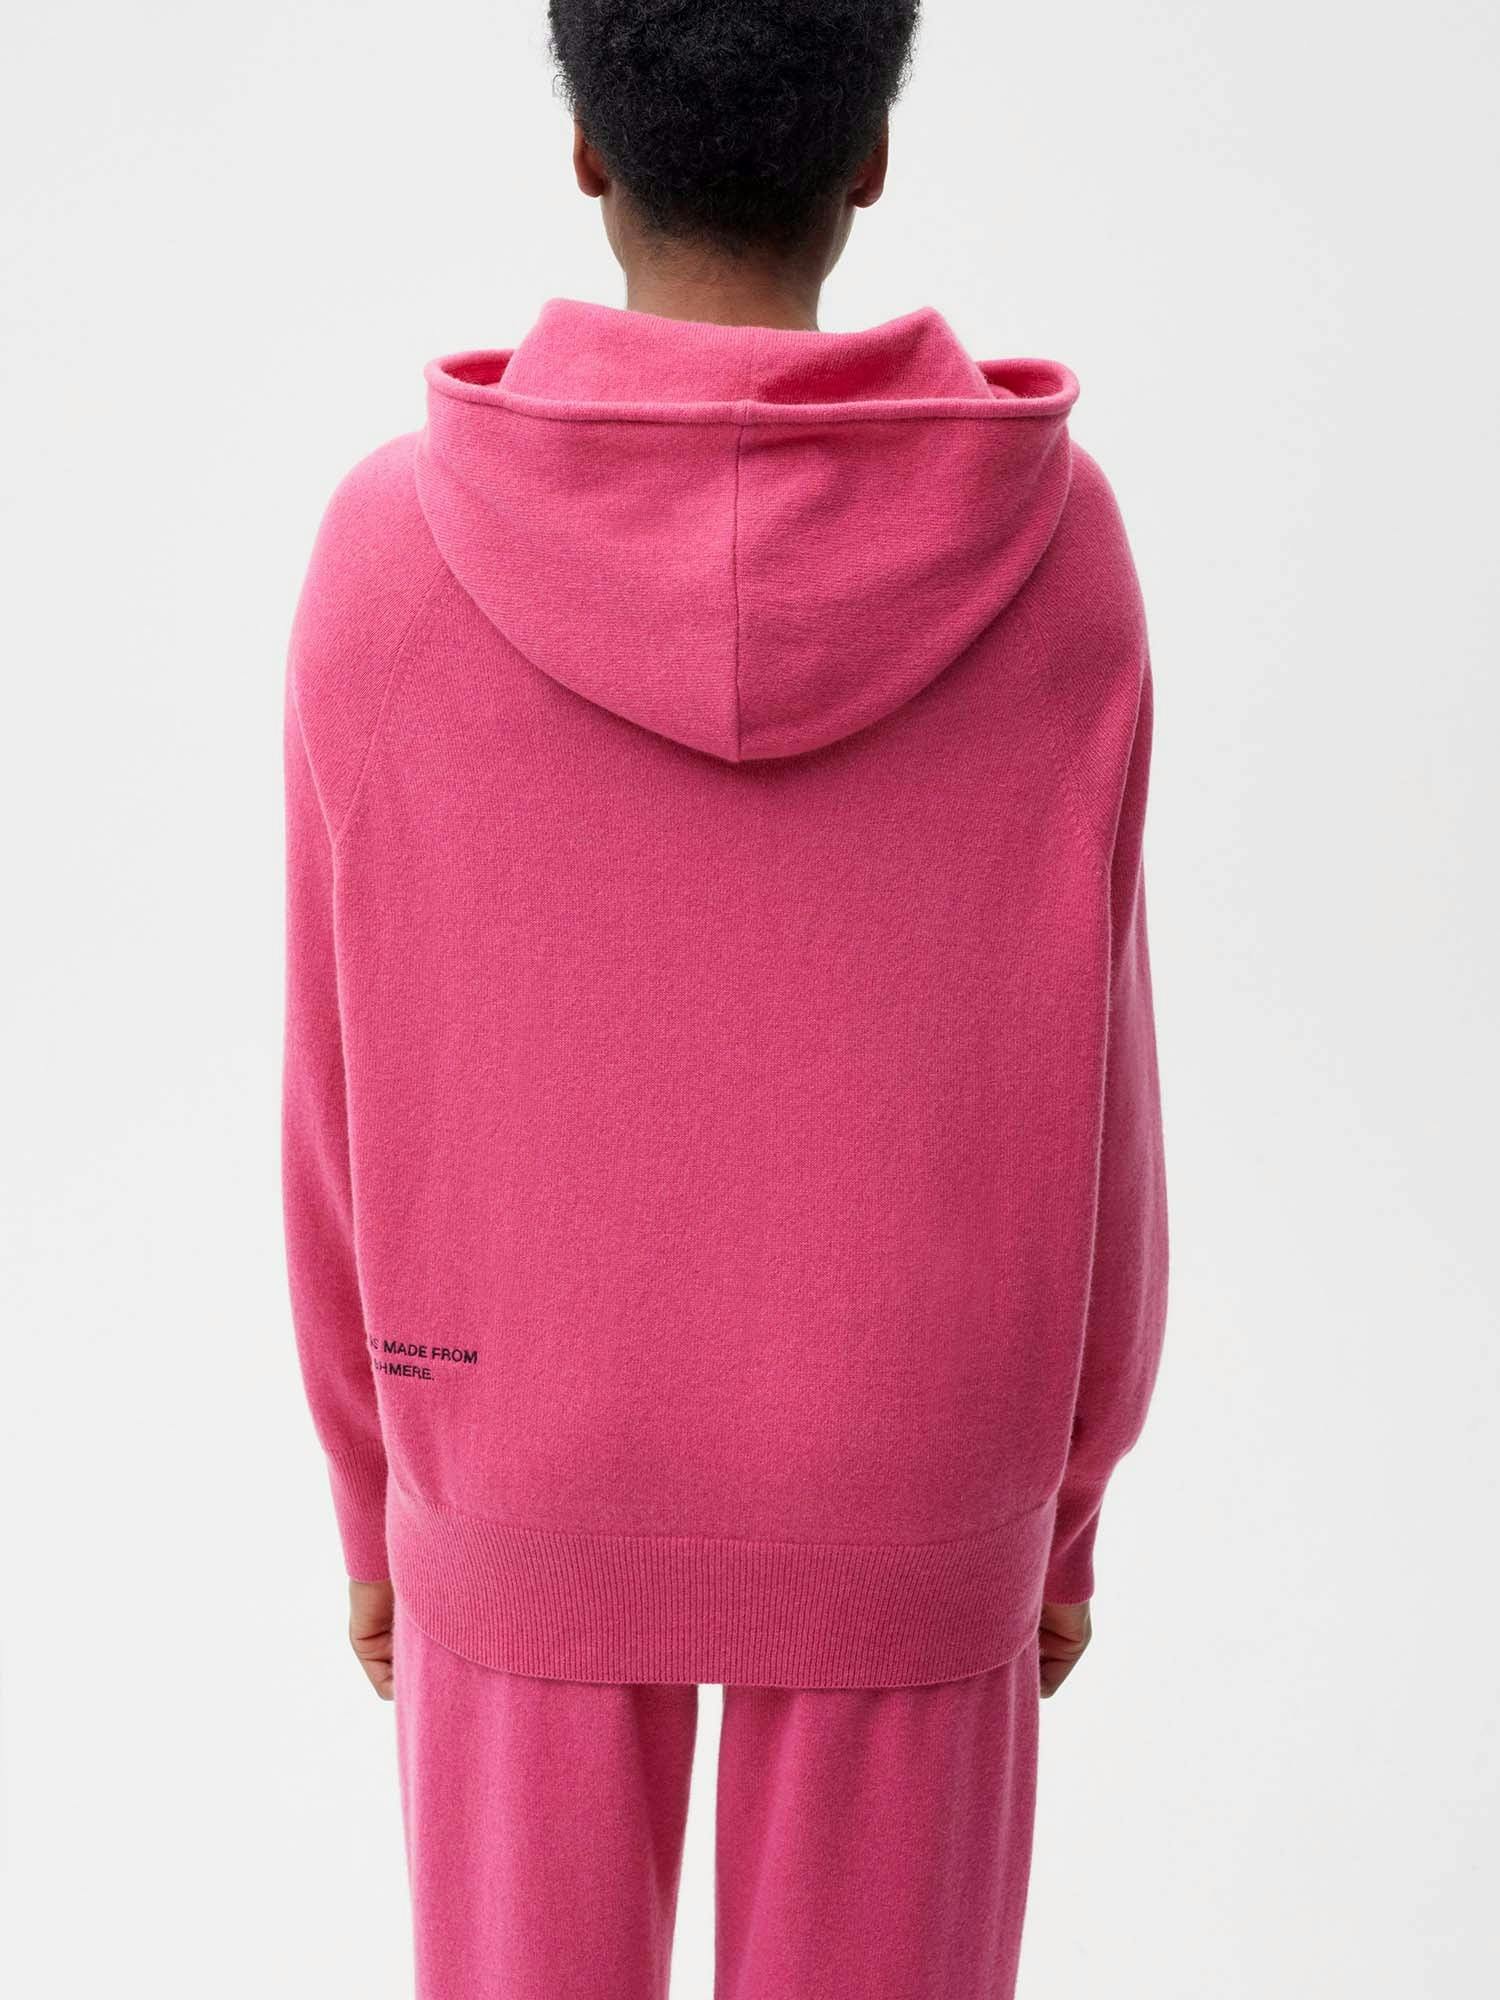 https://cdn.shopify.com/s/files/1/0035/1309/0115/products/Cashmere-Hoodie-Flamingo-Pink-Female-Model-2.jpg?v=1671726306